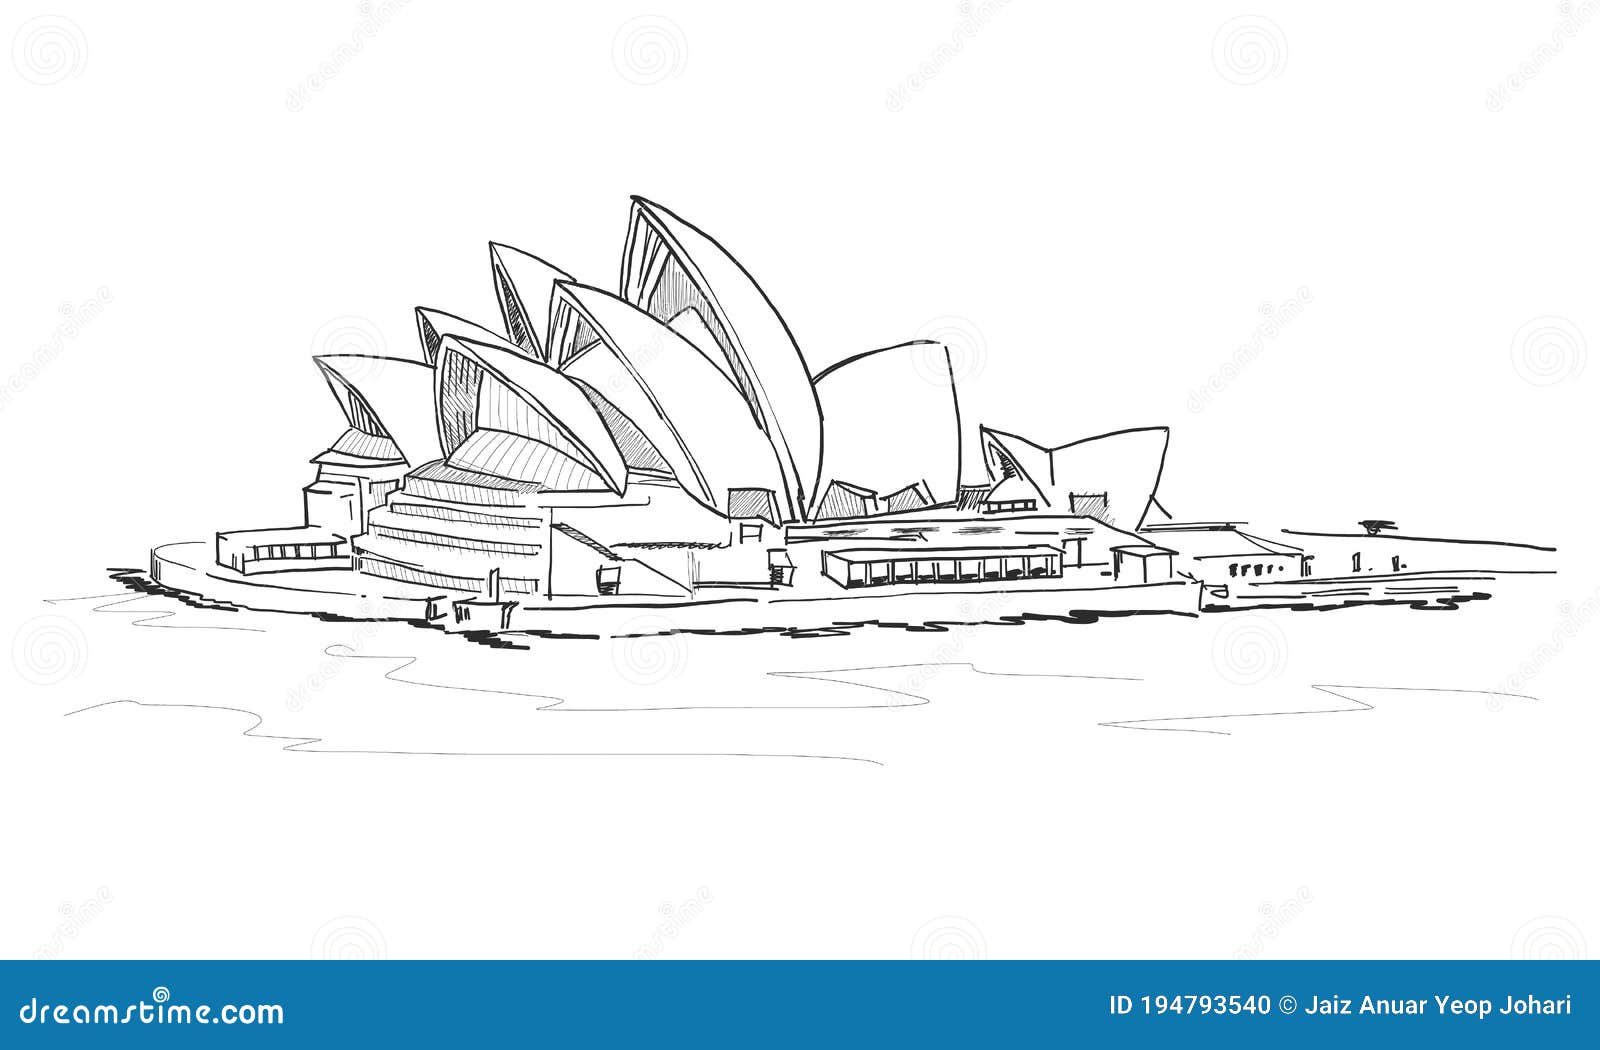 How To Draw Sydney Opera House Step by Step - YouTube